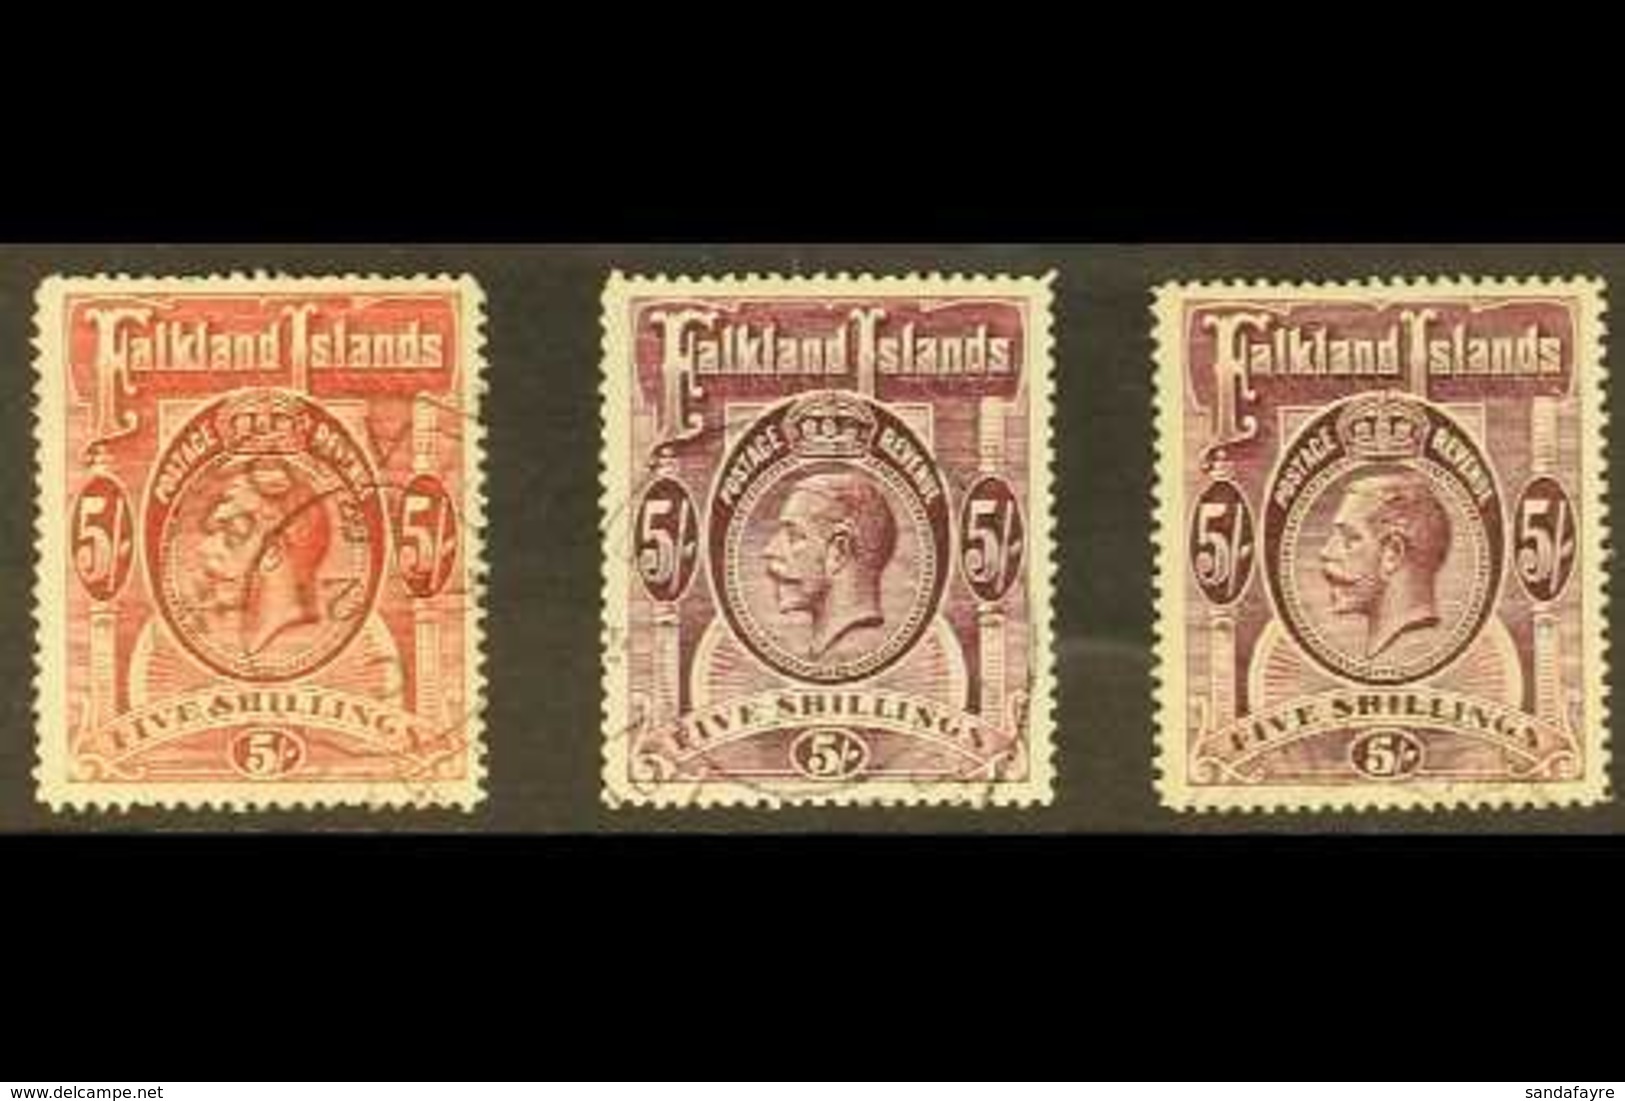 1912-20 (wmk Mult Crown CA) KGV 5s All Three Shades (SG 67, 67a And 67b), Very Fine Used. (3 Stamps) For More Images, Pl - Falkland